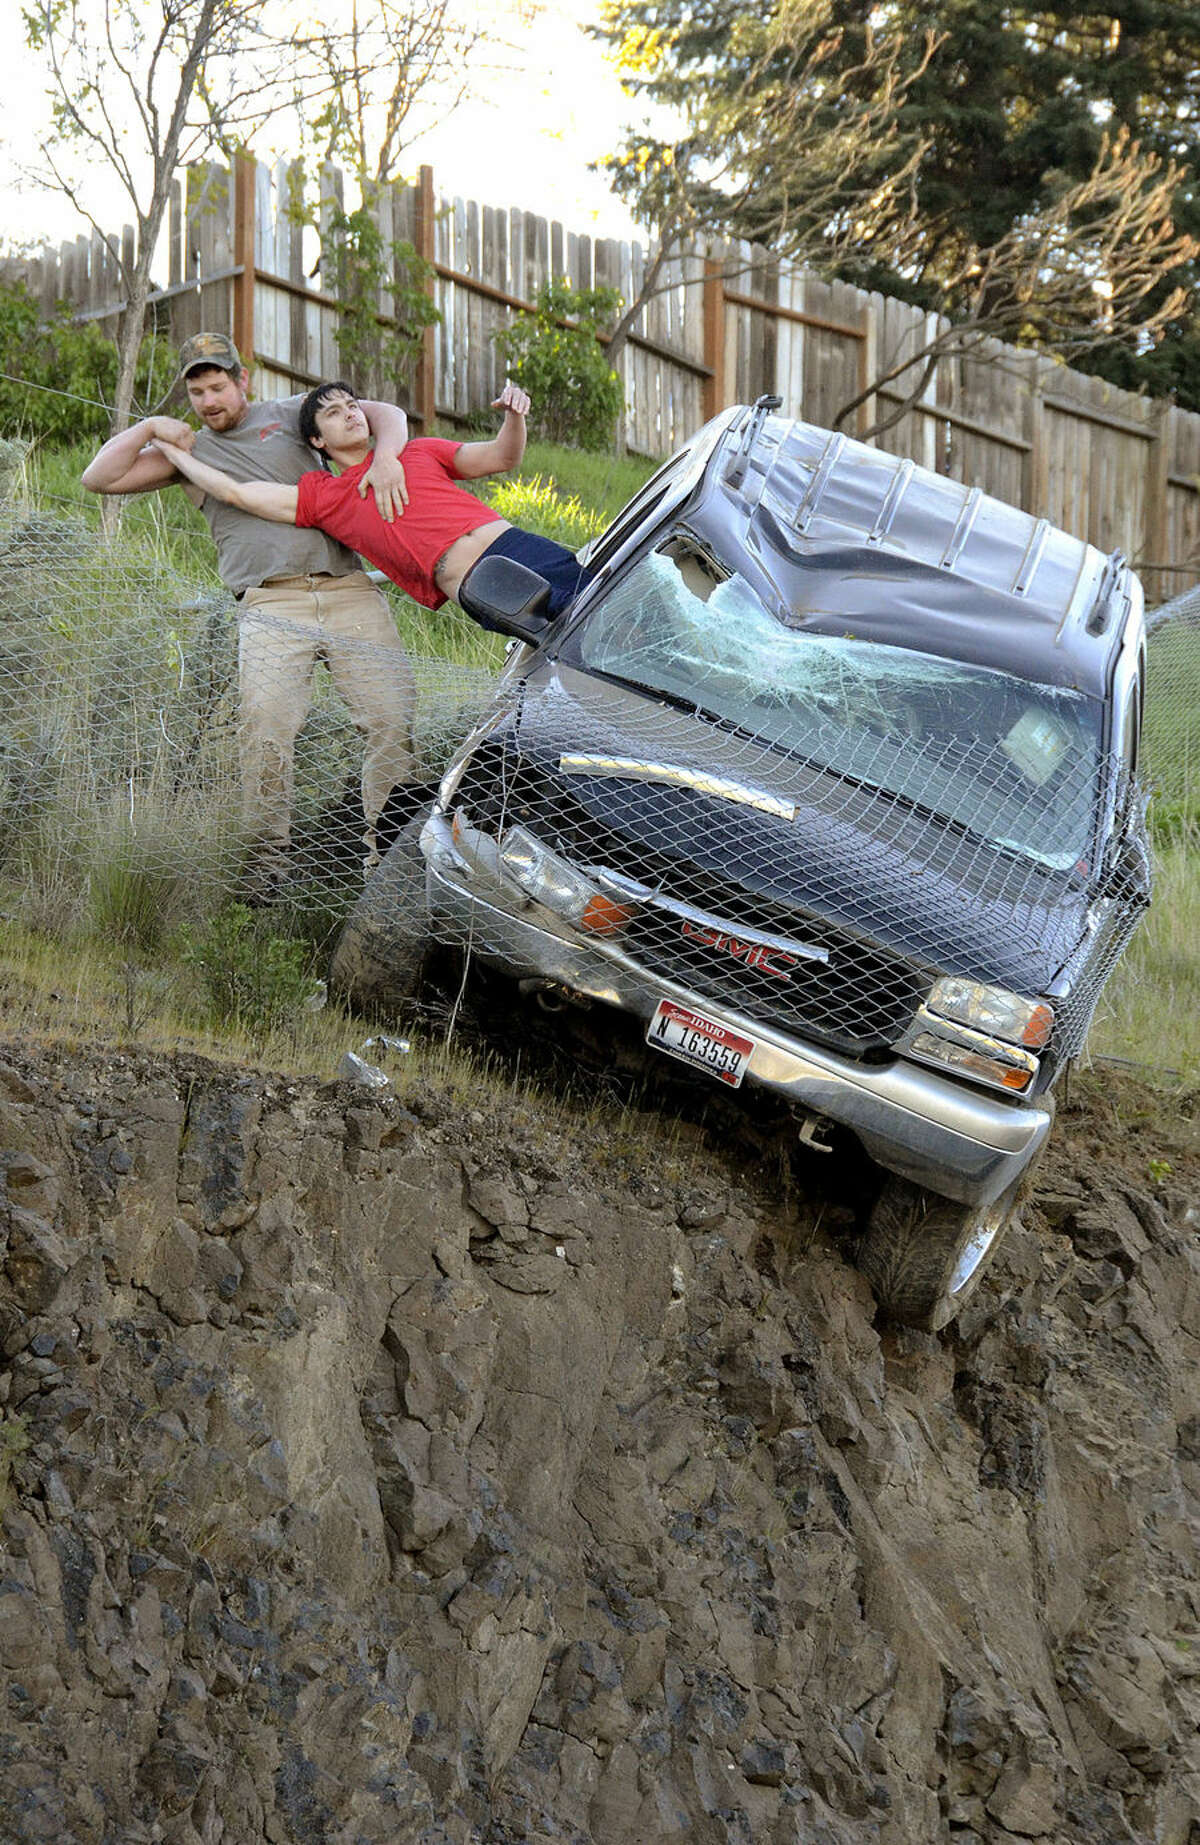 An unidentified passer-by pulls the driver from a SUV to safety after the vehicle left Mayfair Drive, traveled downhill and was stopped by a chain link fence just short of a 30-foot vertical drop onto the Bryden Canyon Road, Wednesday, April 15, 2015, in Lewiston, Idaho. (Barry Kough/Lewiston Tribune via AP)